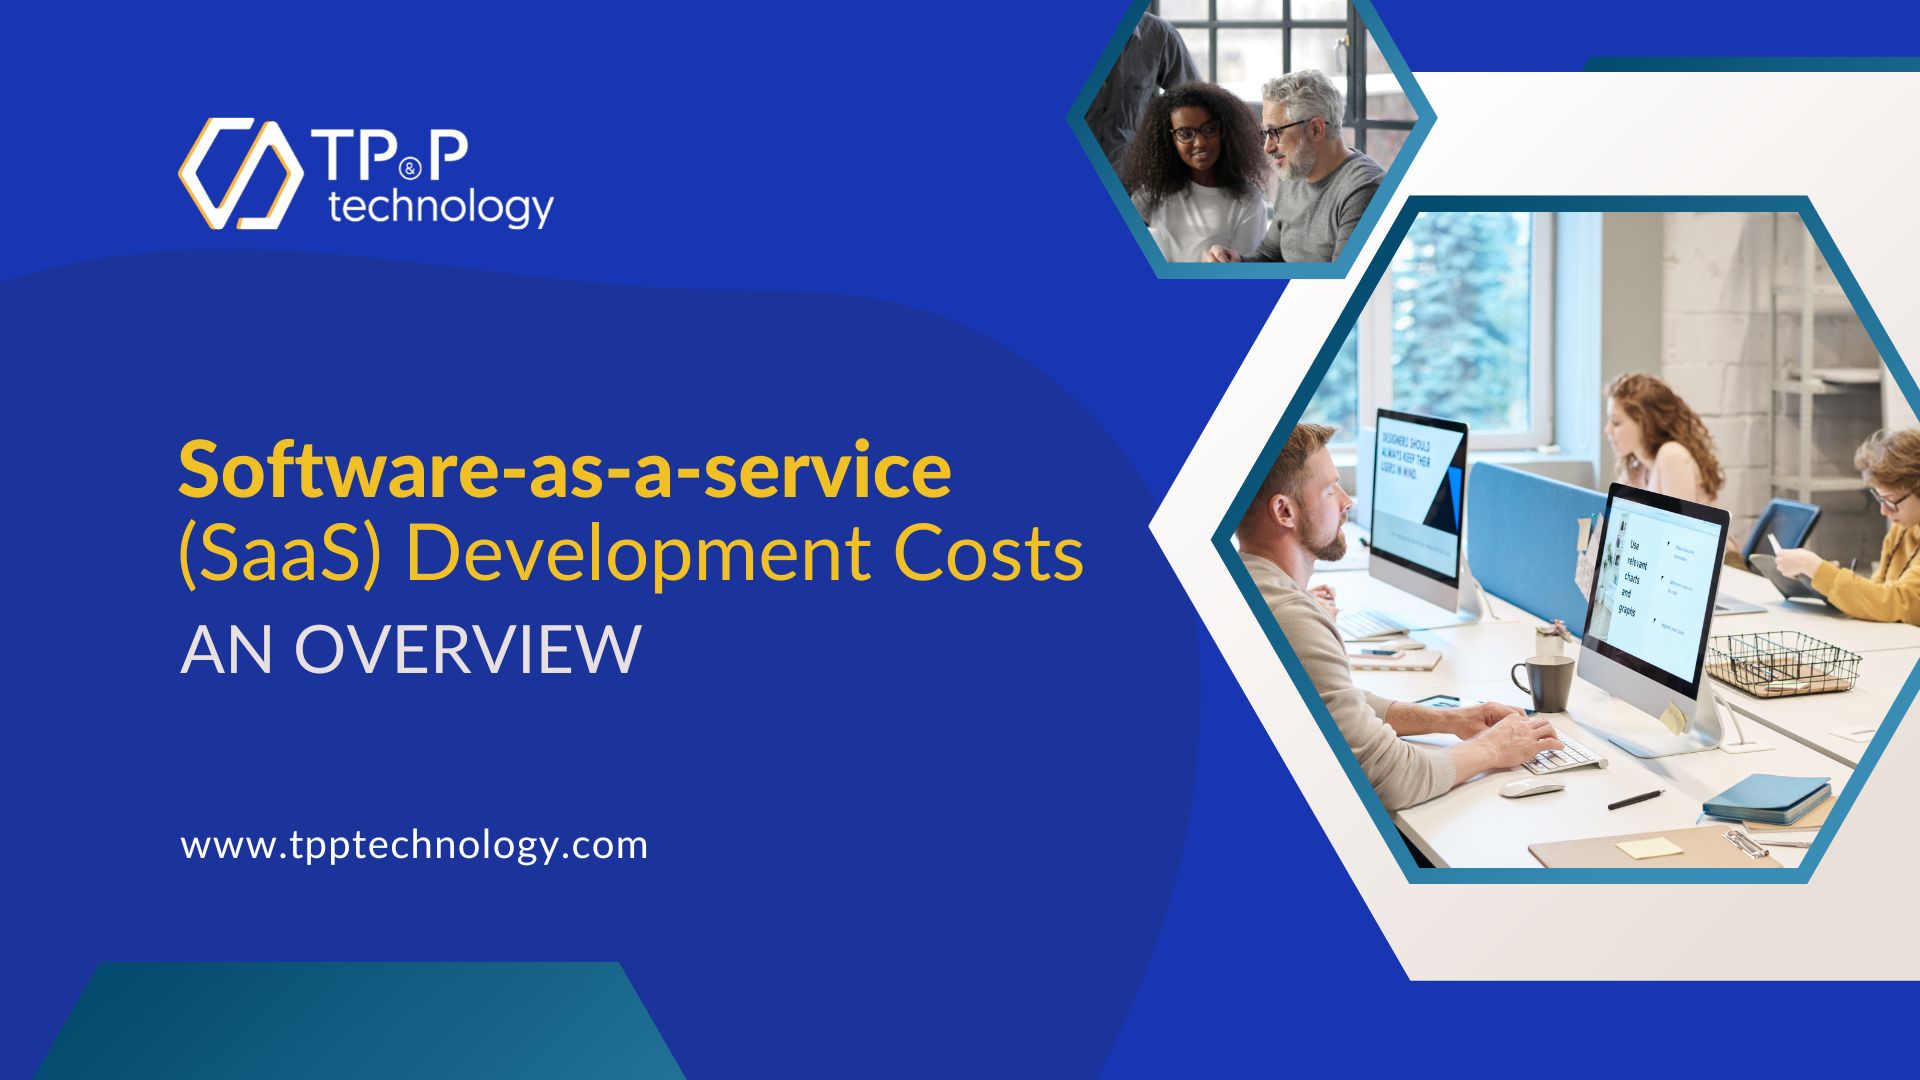 Software-as-a-service (SaaS) Development Costs: An Overview